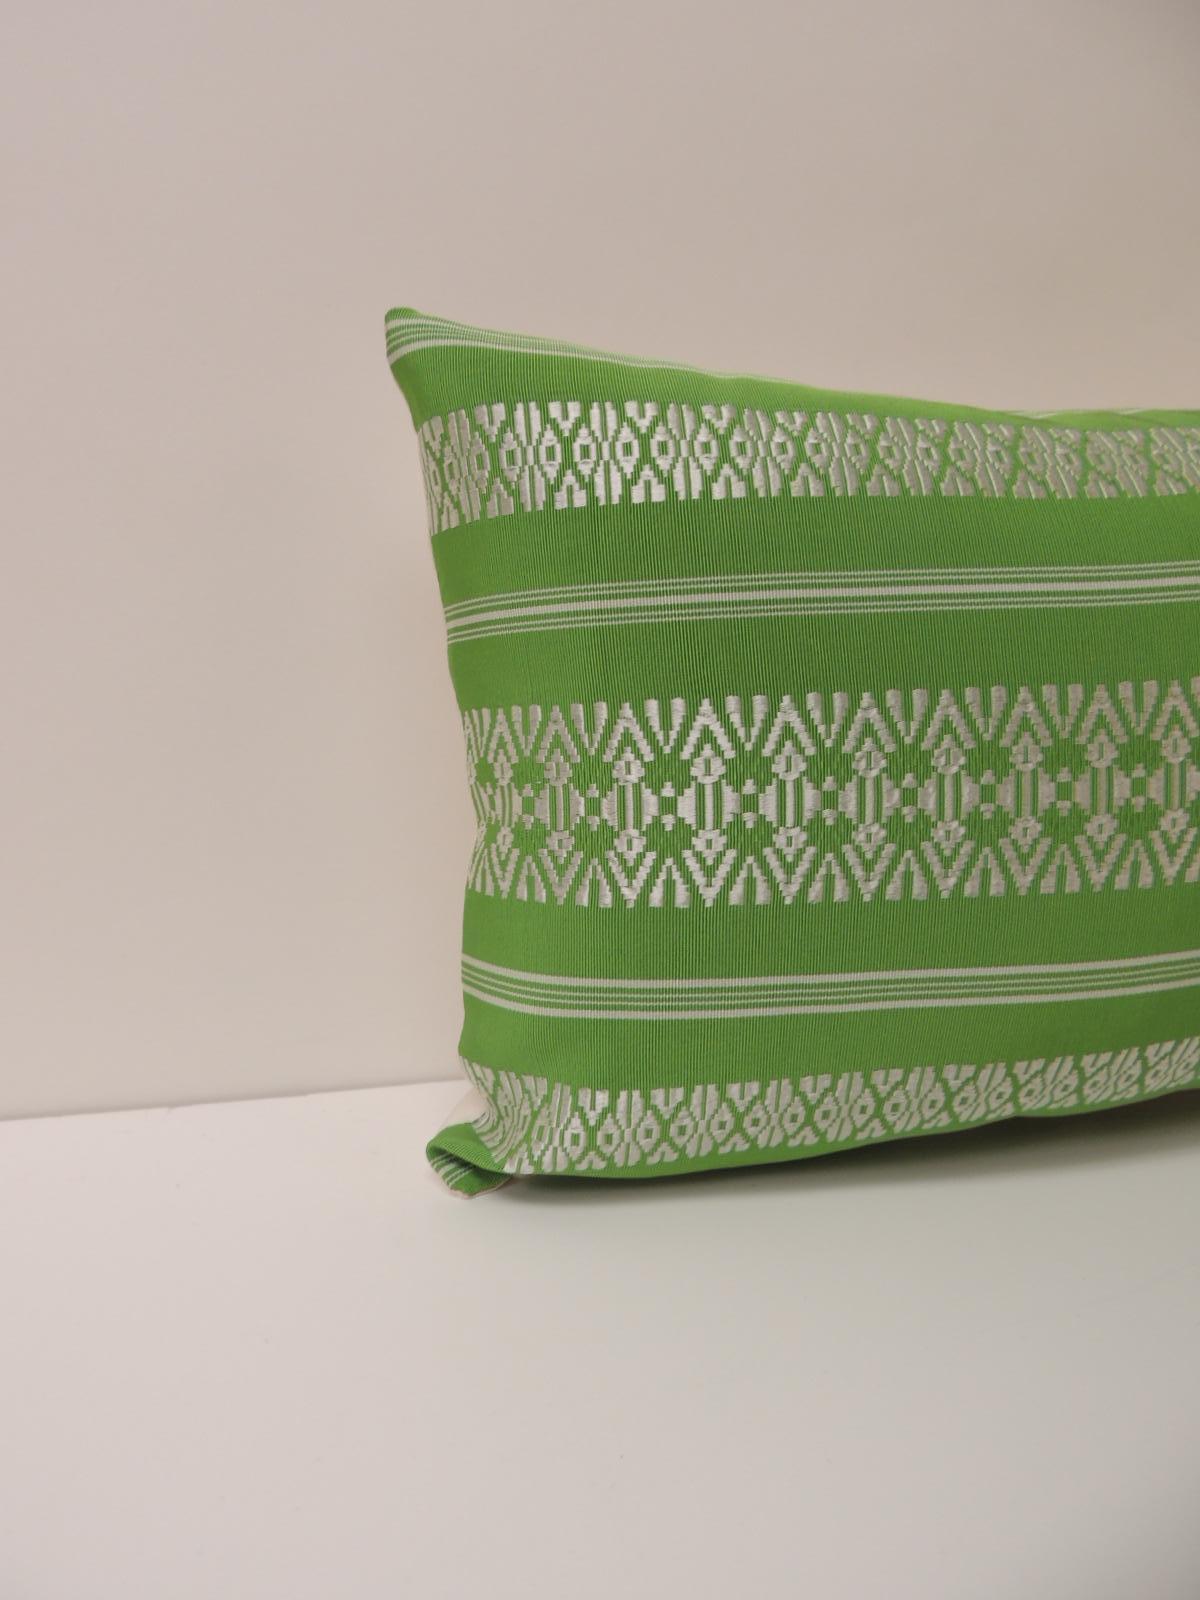 Vintage acid green woven stripes silk Asian decorative lumbar pillow with natural silk backing,
decorative pillow handcrafted and designed in the USA. Closure by stitch (no zipper closure) with custom made pillow insert.
Size: 12 x 20 x 6.